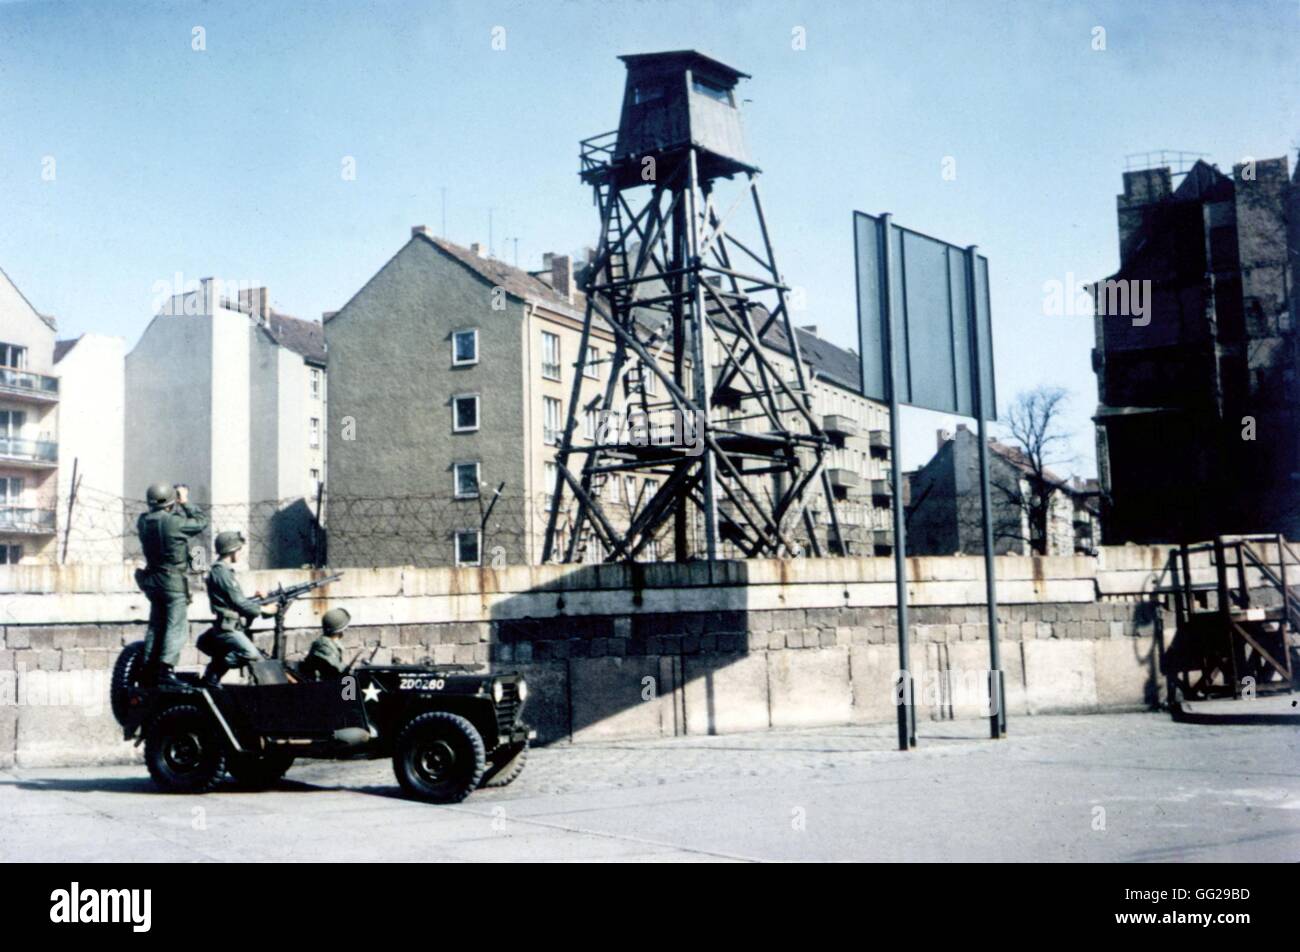 West Berlin. American soldiers patrolling in front of the Berlin wall c. 1965-1970 Germany (F.R.G.) Washington. Library of Congress Stock Photo